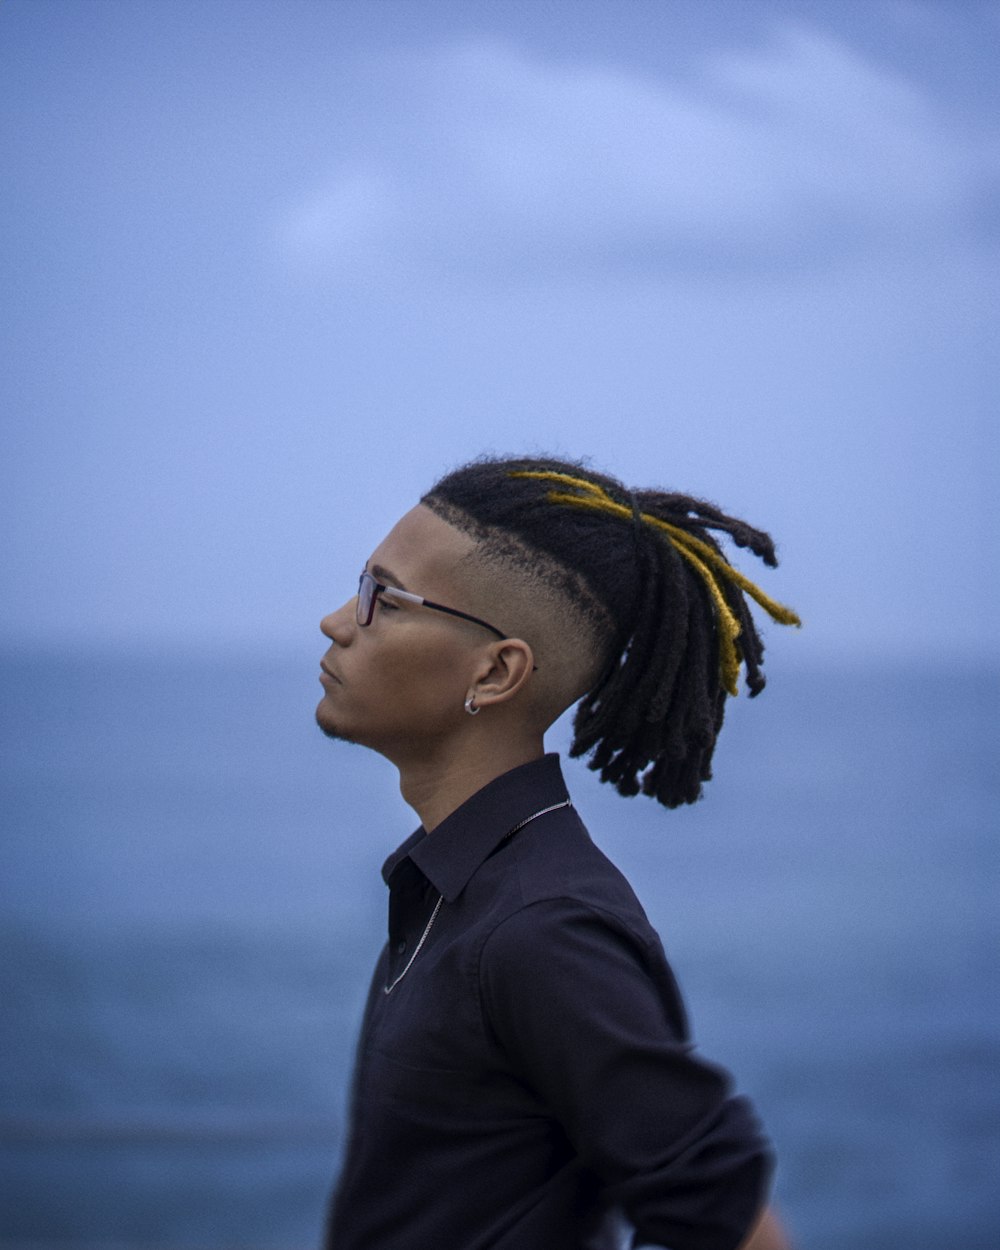 a man with dreadlocks standing in front of the ocean